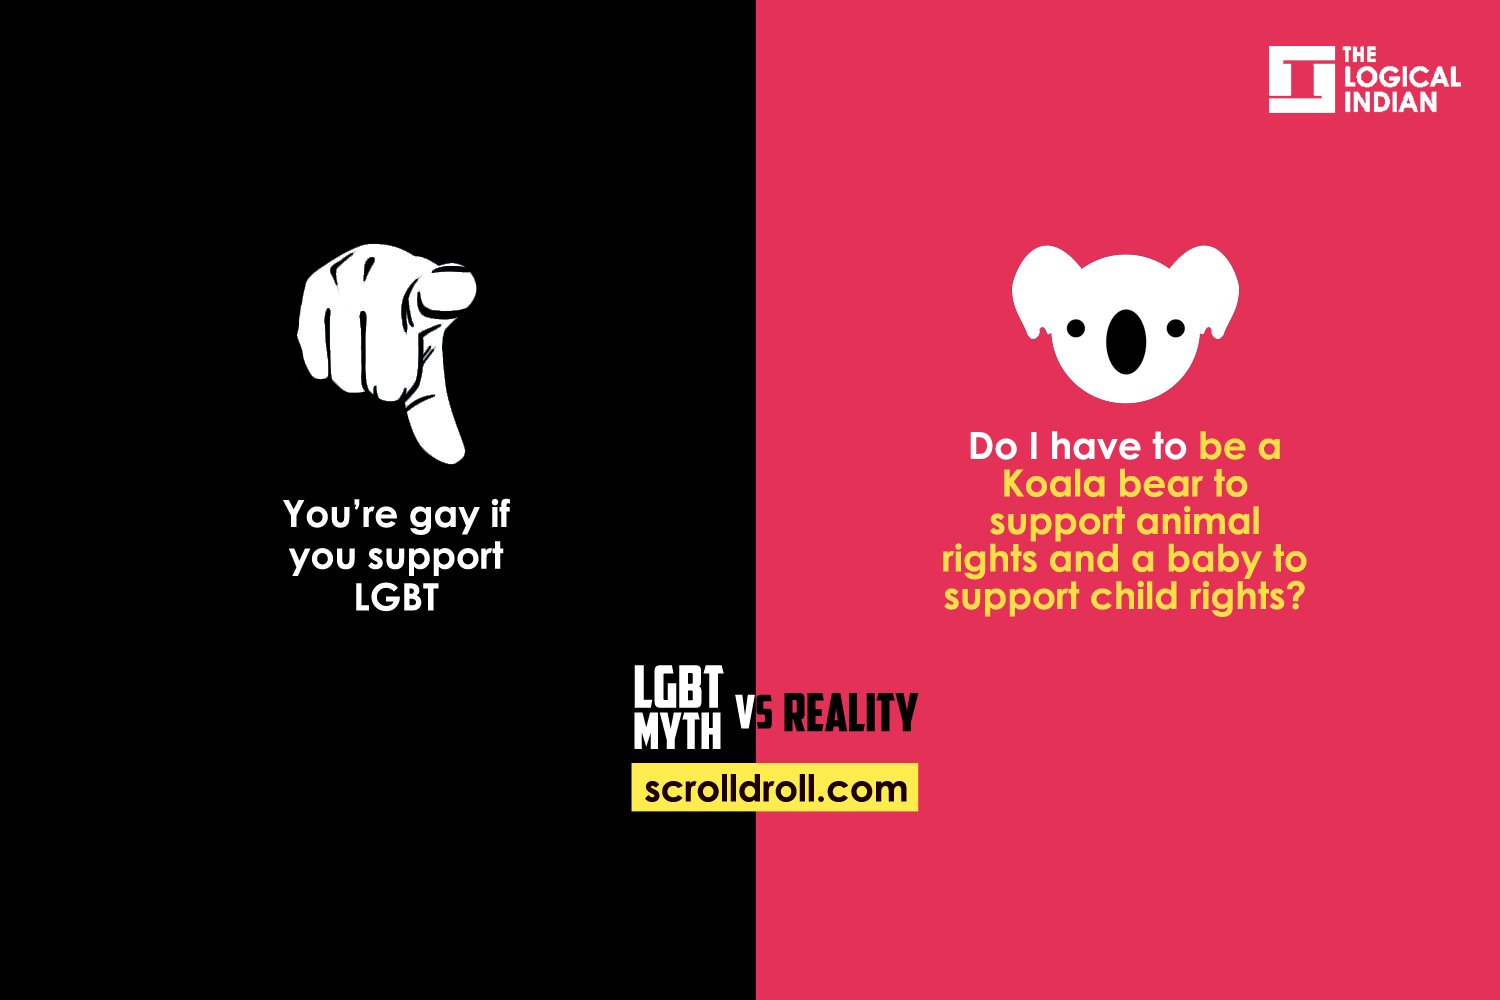 LGBT Myths Debunked: A Series Of Images Which Differentiates The Reality From The Myth